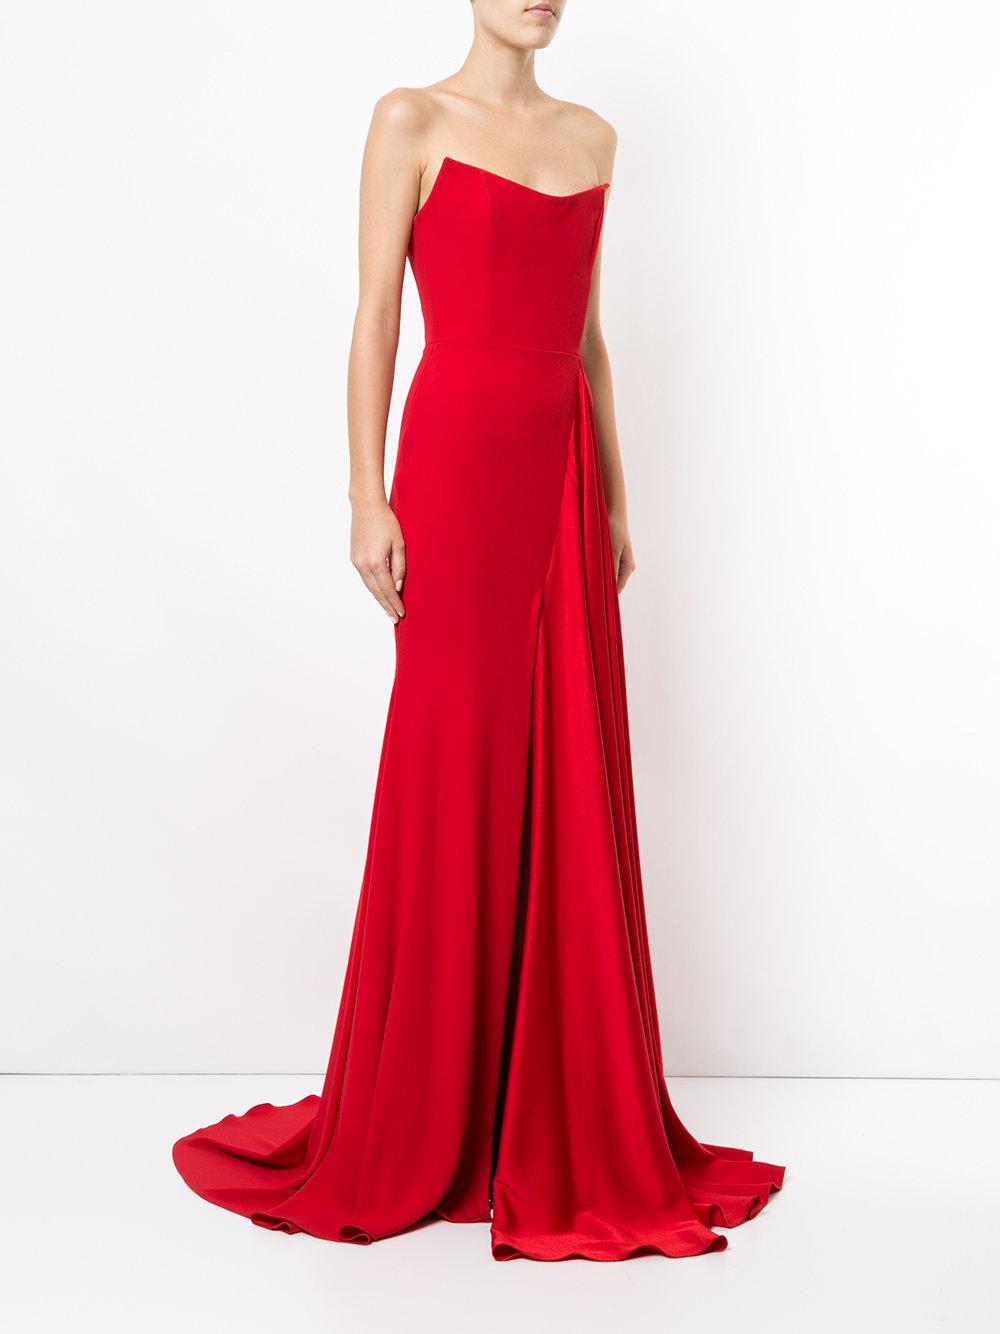 Alex Perry Synthetic Alex Strapless Drape Gown in Red - Lyst